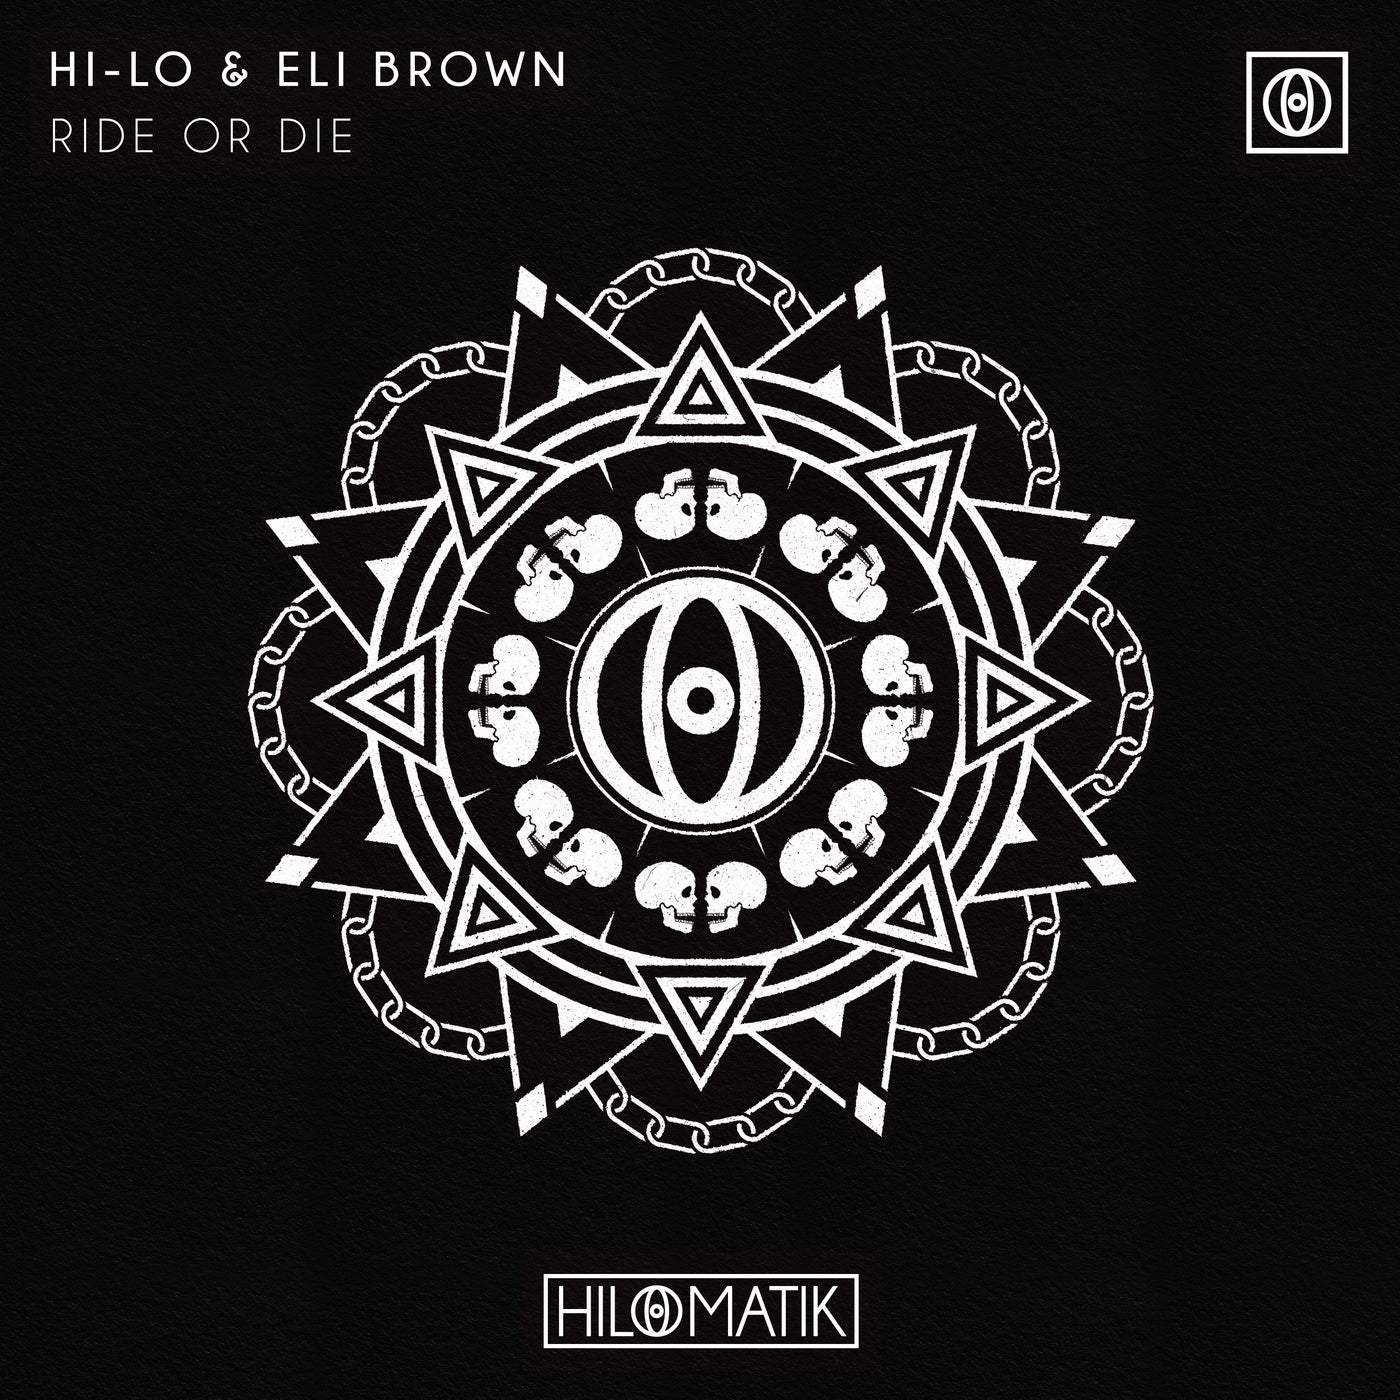 image cover: RIDE OR DIE (Extended Mix) by HI-LO, Eli Brown on HILOMATIK